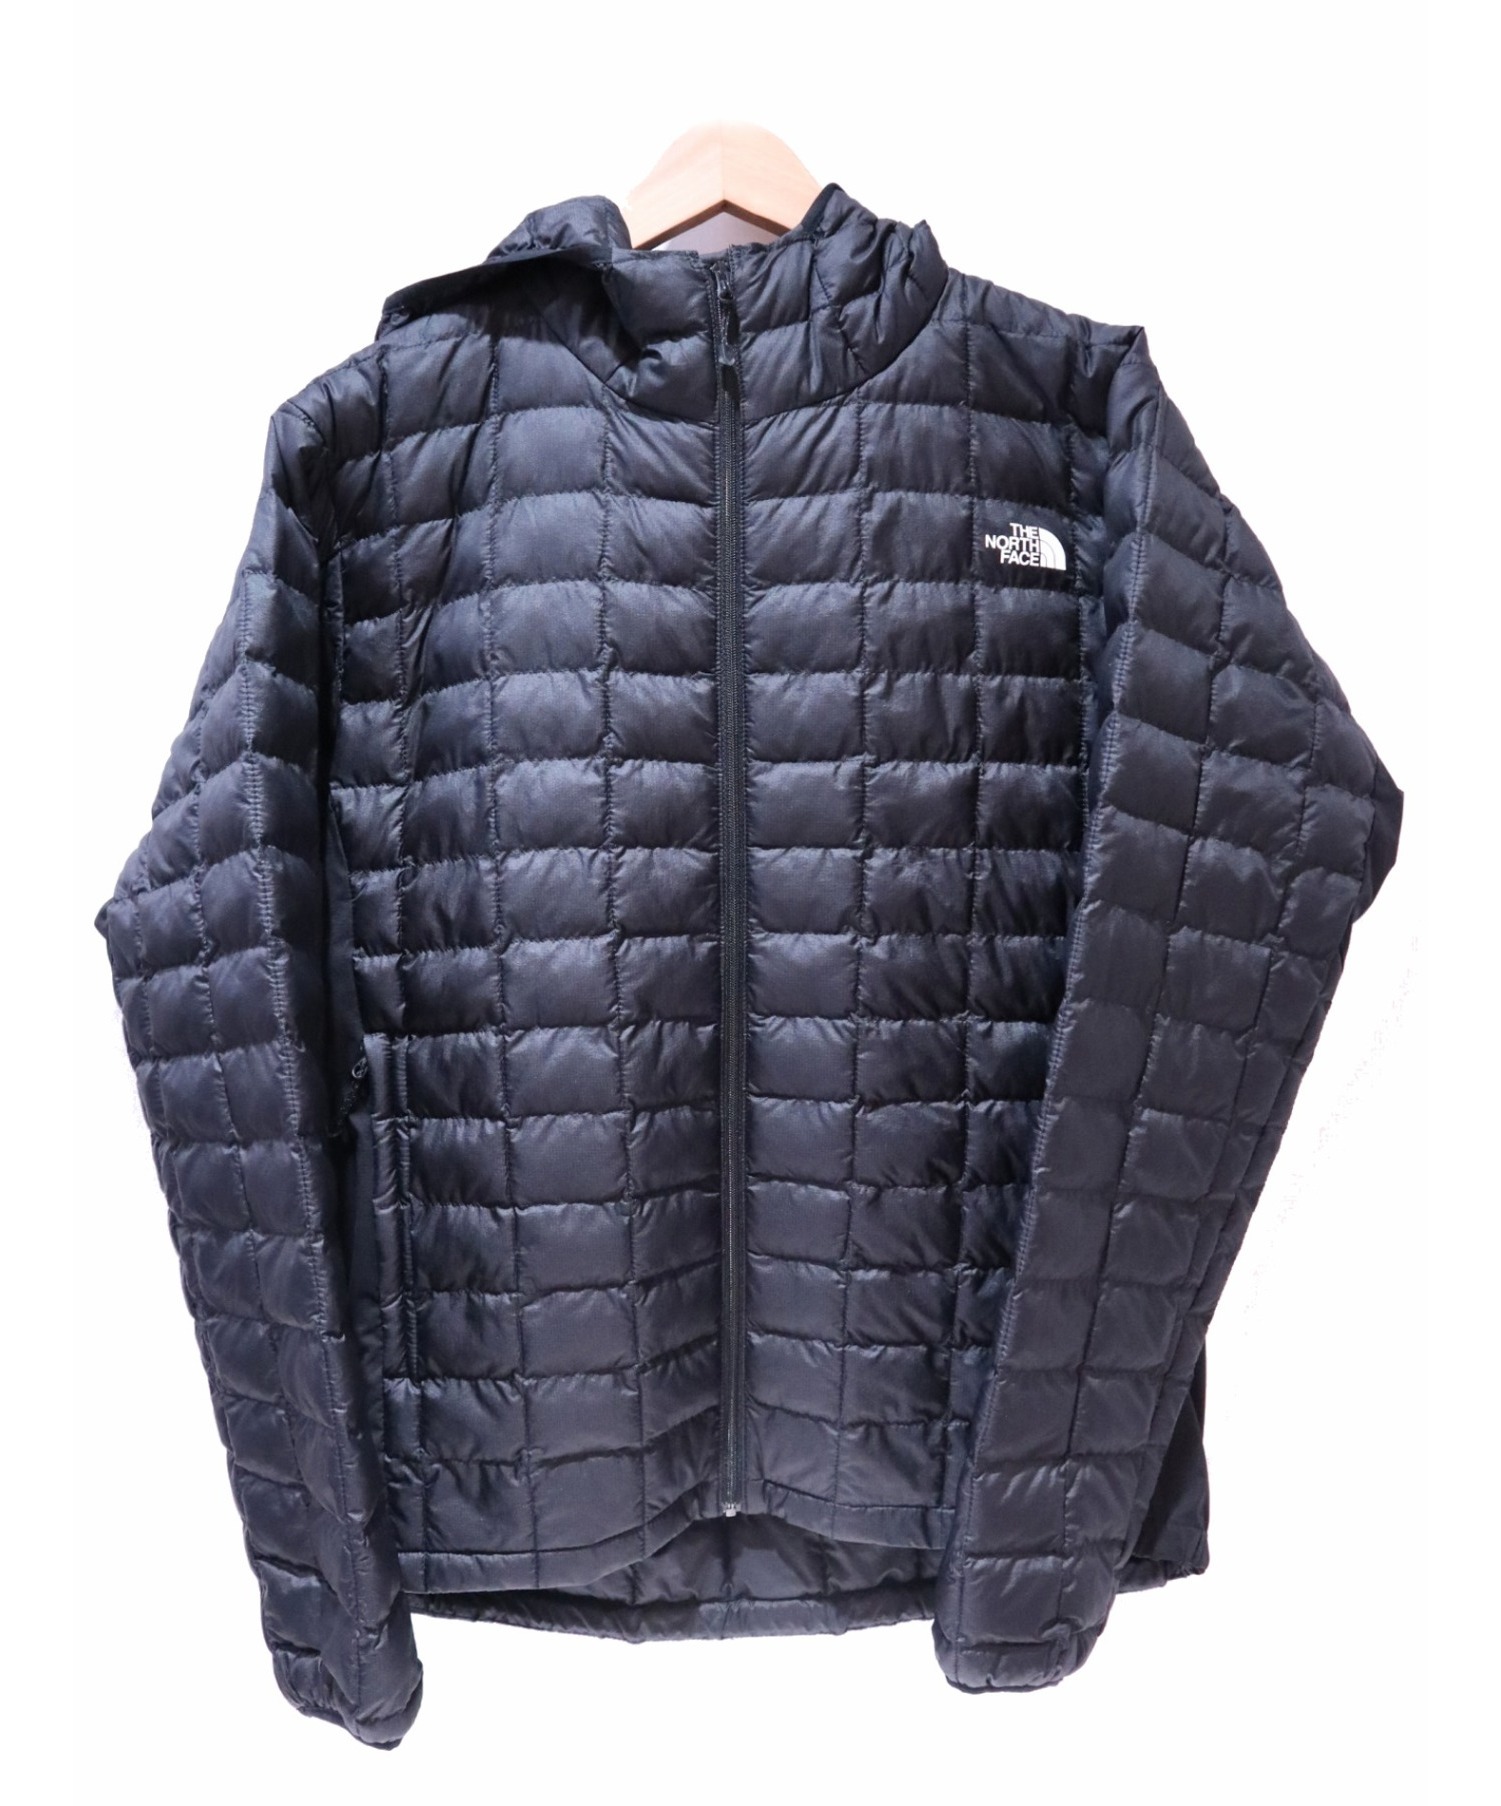 THE NORTH FACE】REDPOINT LIGHT size M